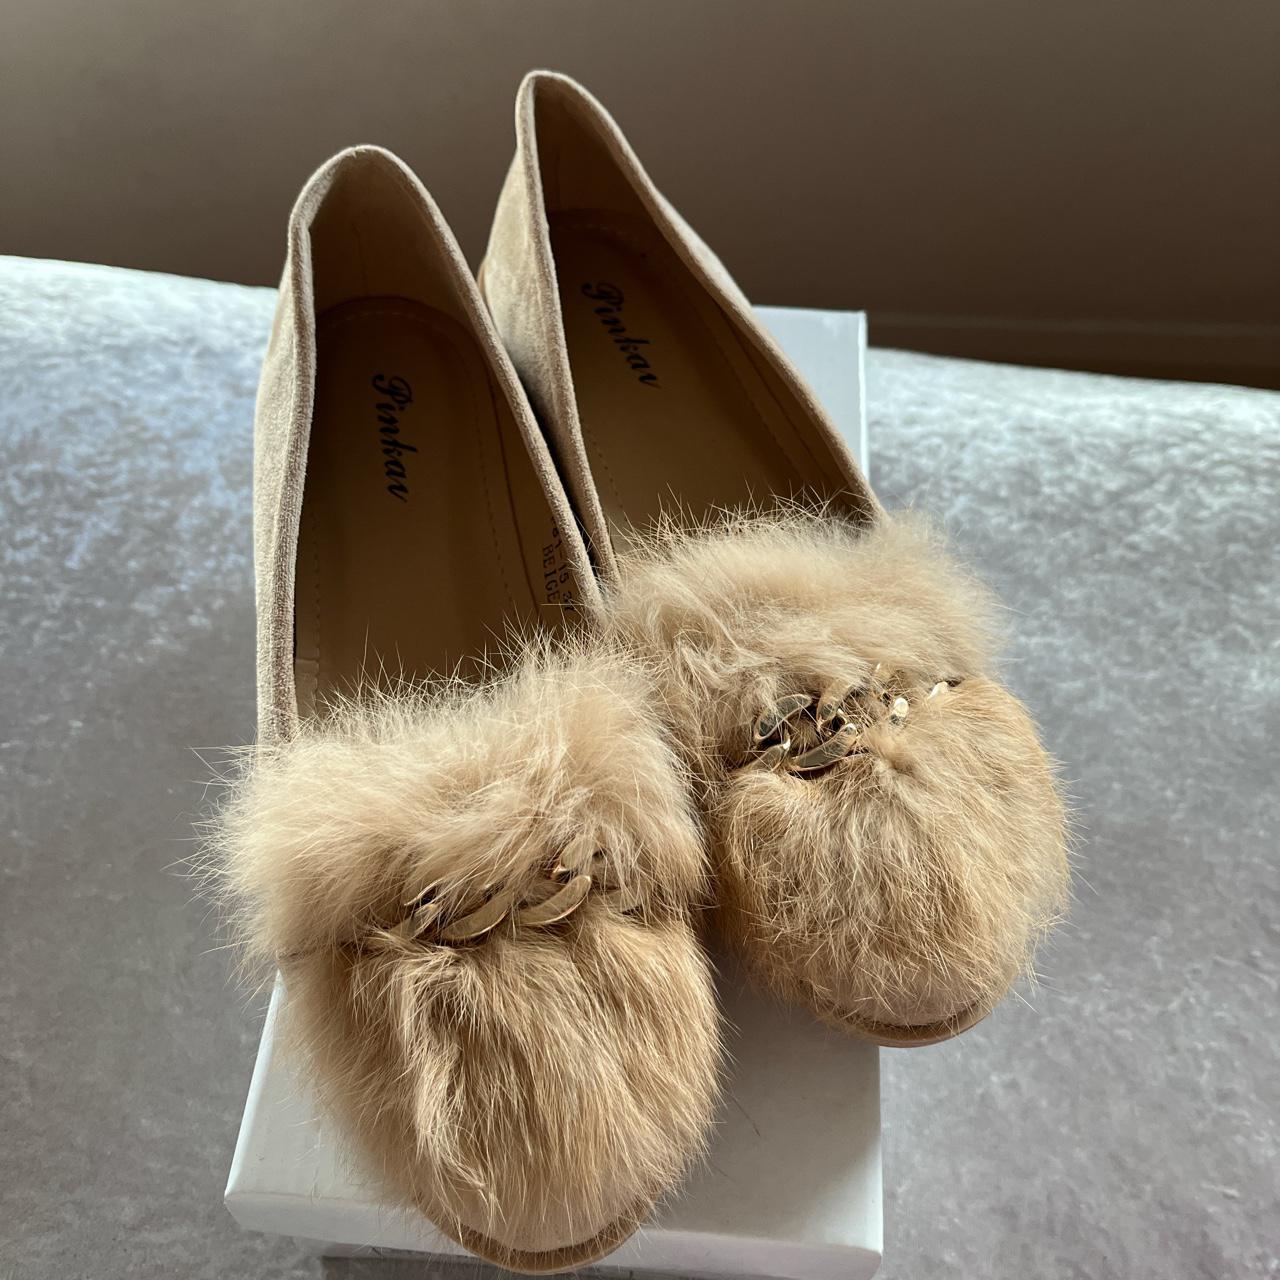 Pinkai beige shoes with fur. Never worn brand new.... - Depop